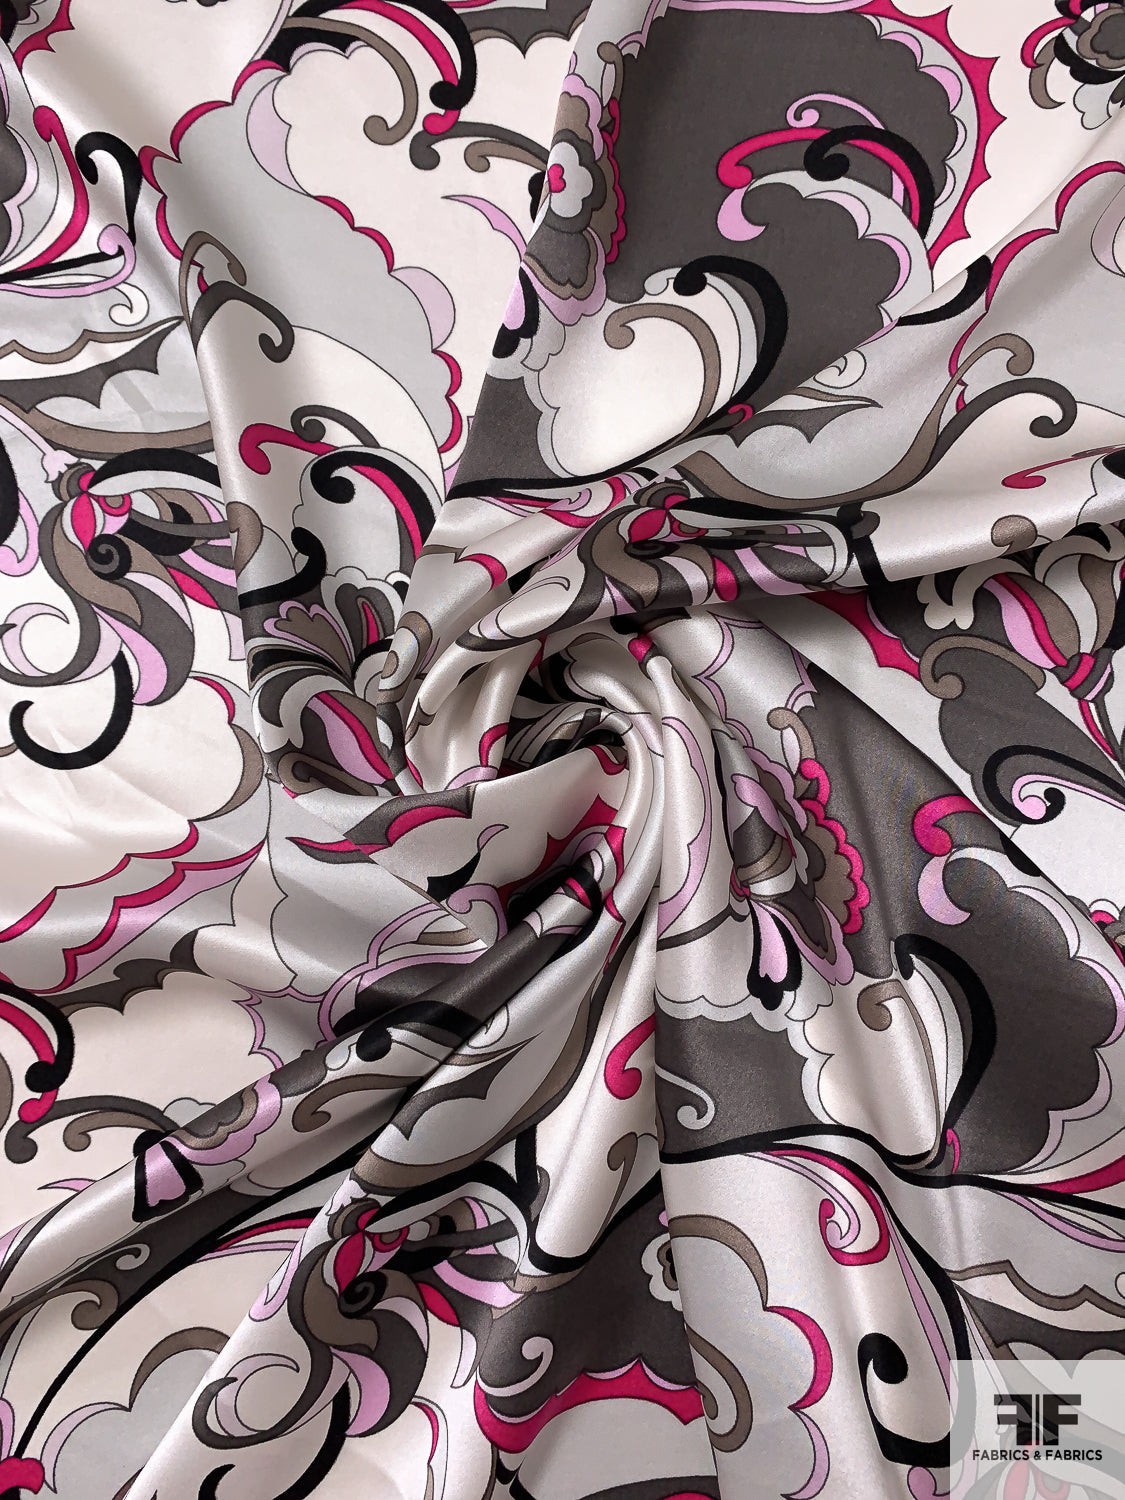 NY designer 'pucci' stretch silk charmeuse - nectarine from